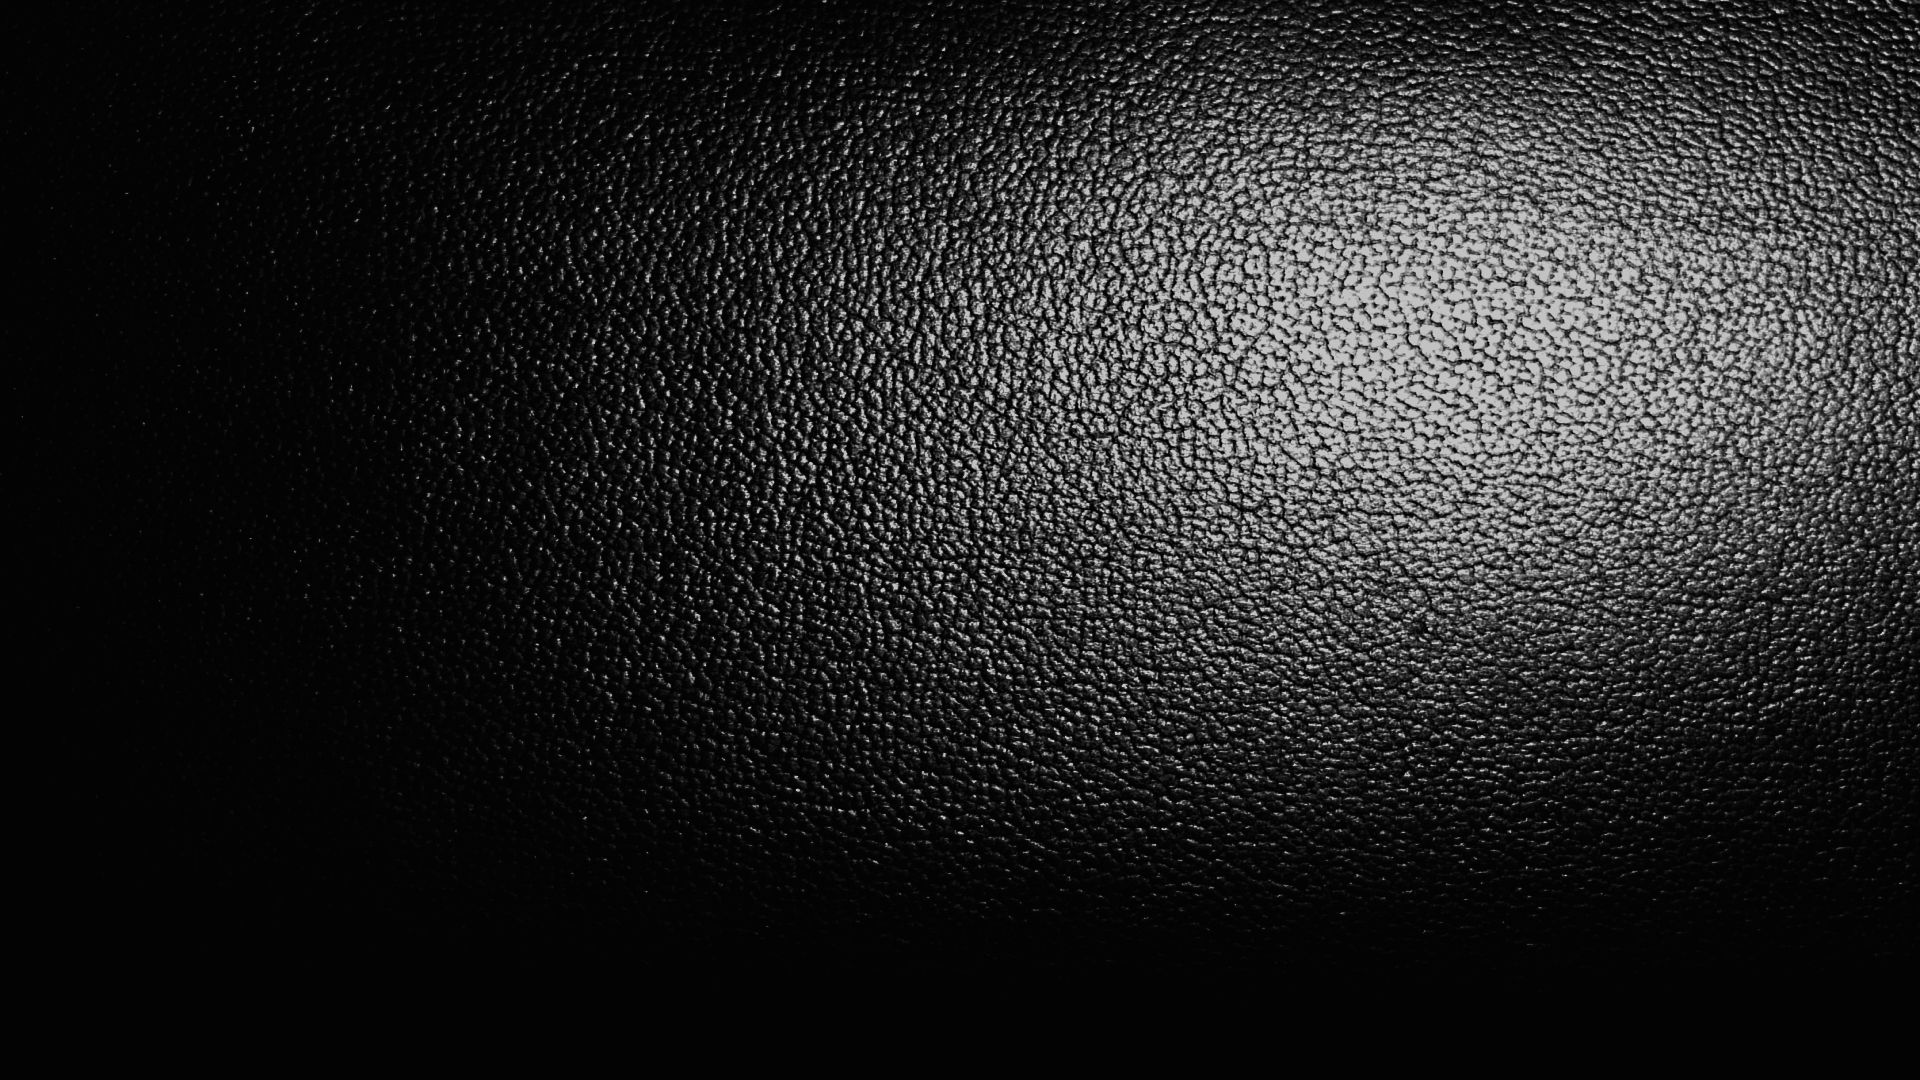 Download Leather Textures Wallpaper 1920x1080 Full HD Backgrounds